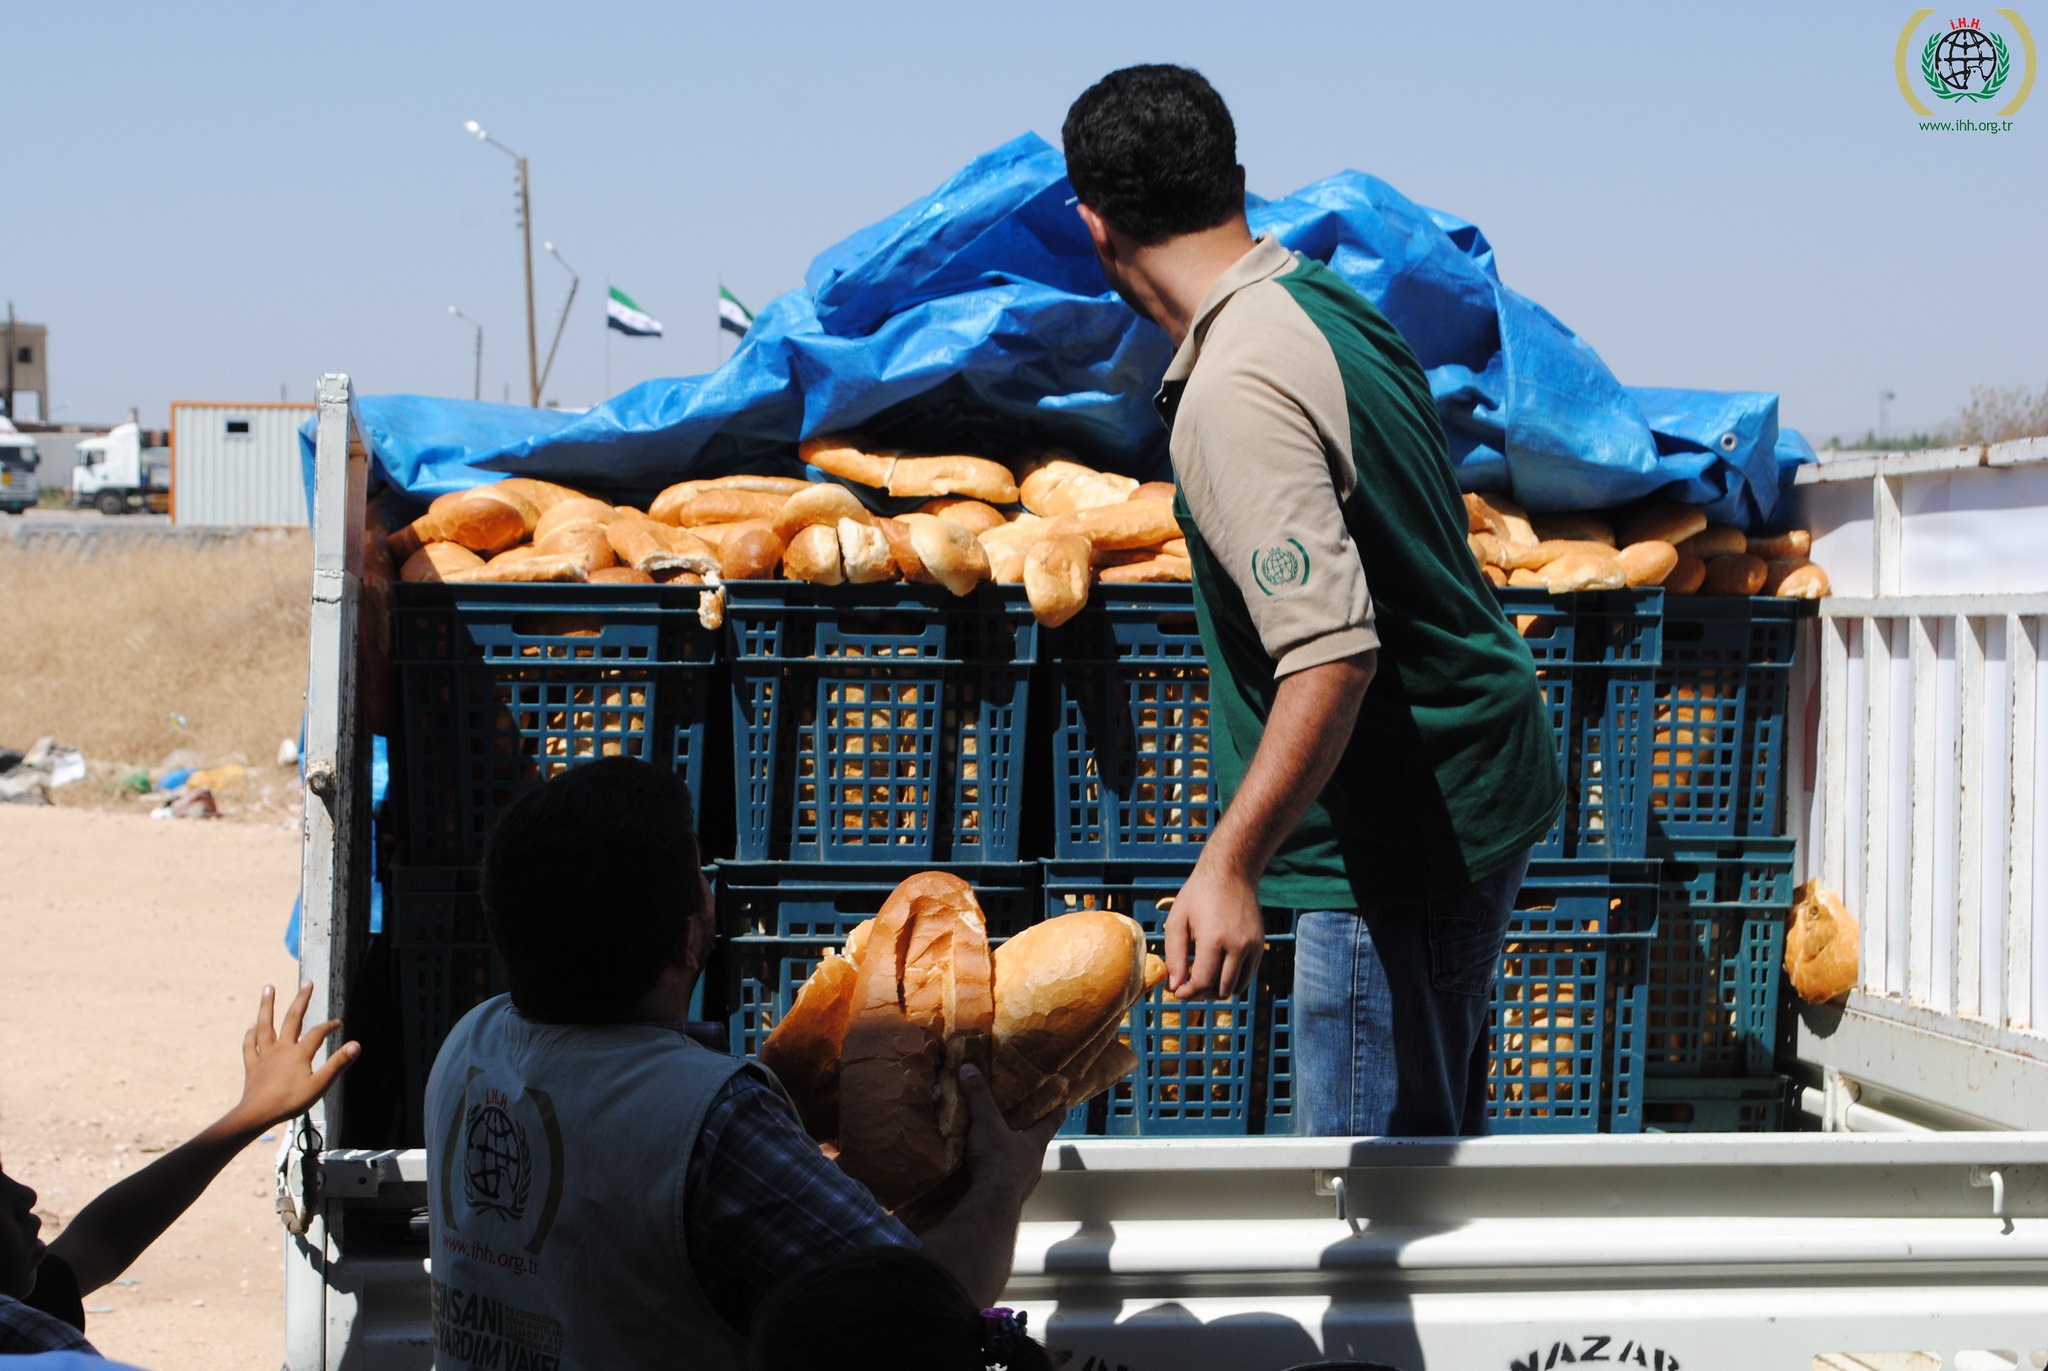 Plastic bins filled with bread on the back of a truck with a blue tarp over the top. Two people viewed from behind are unloading the bins.